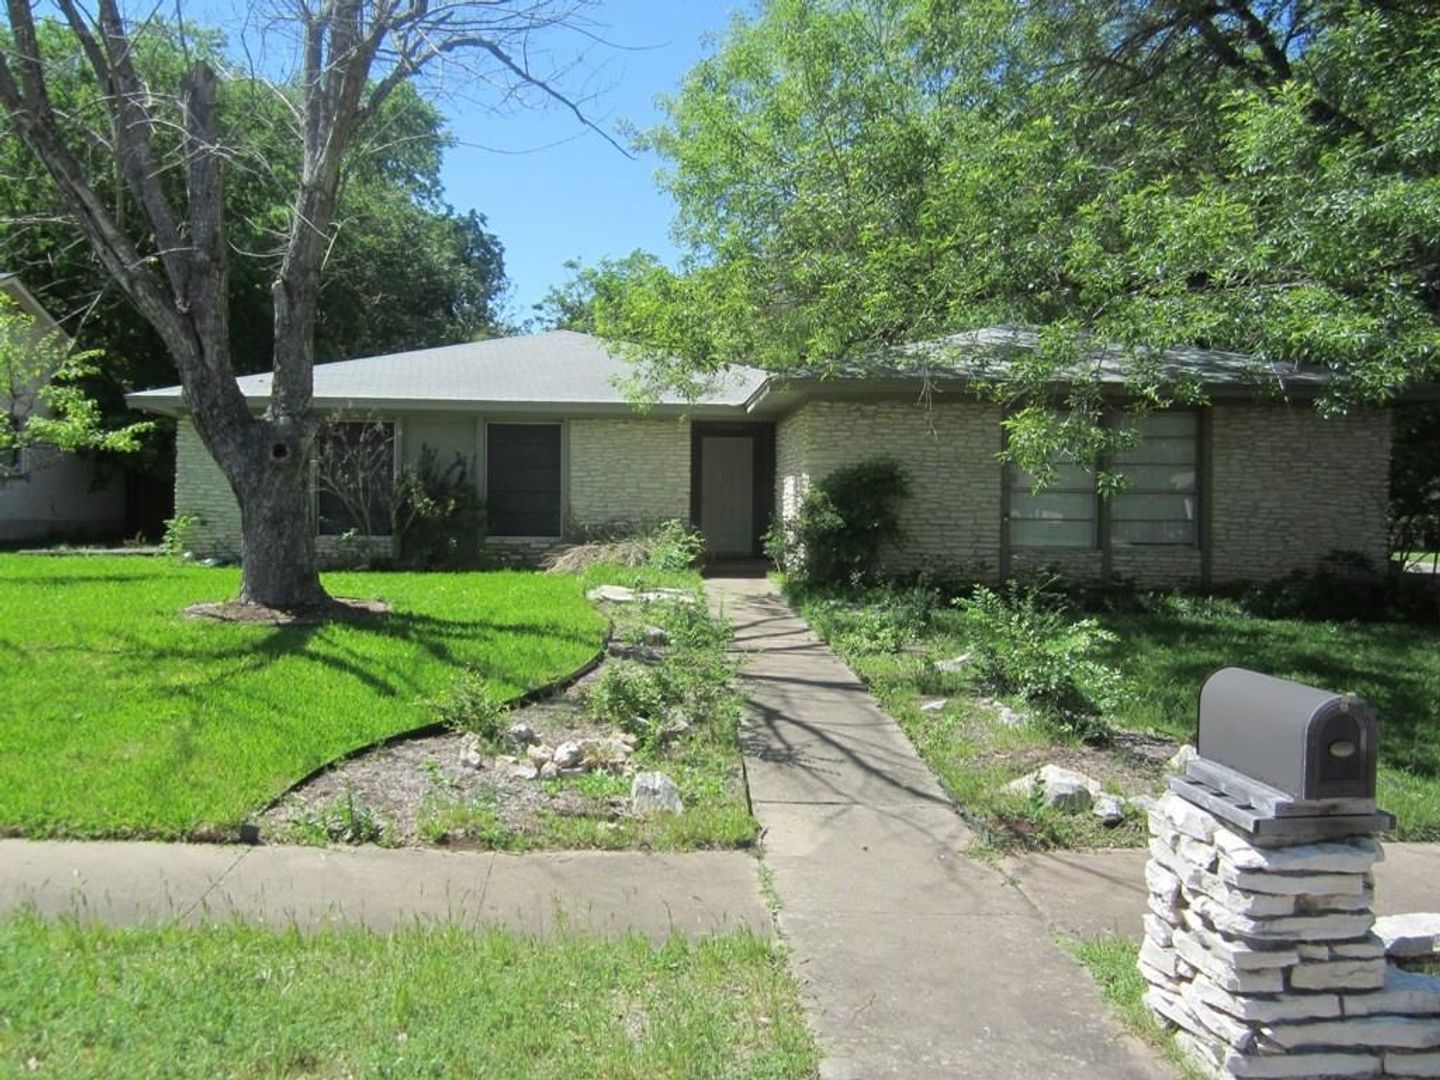 NW Austin Home available early July!